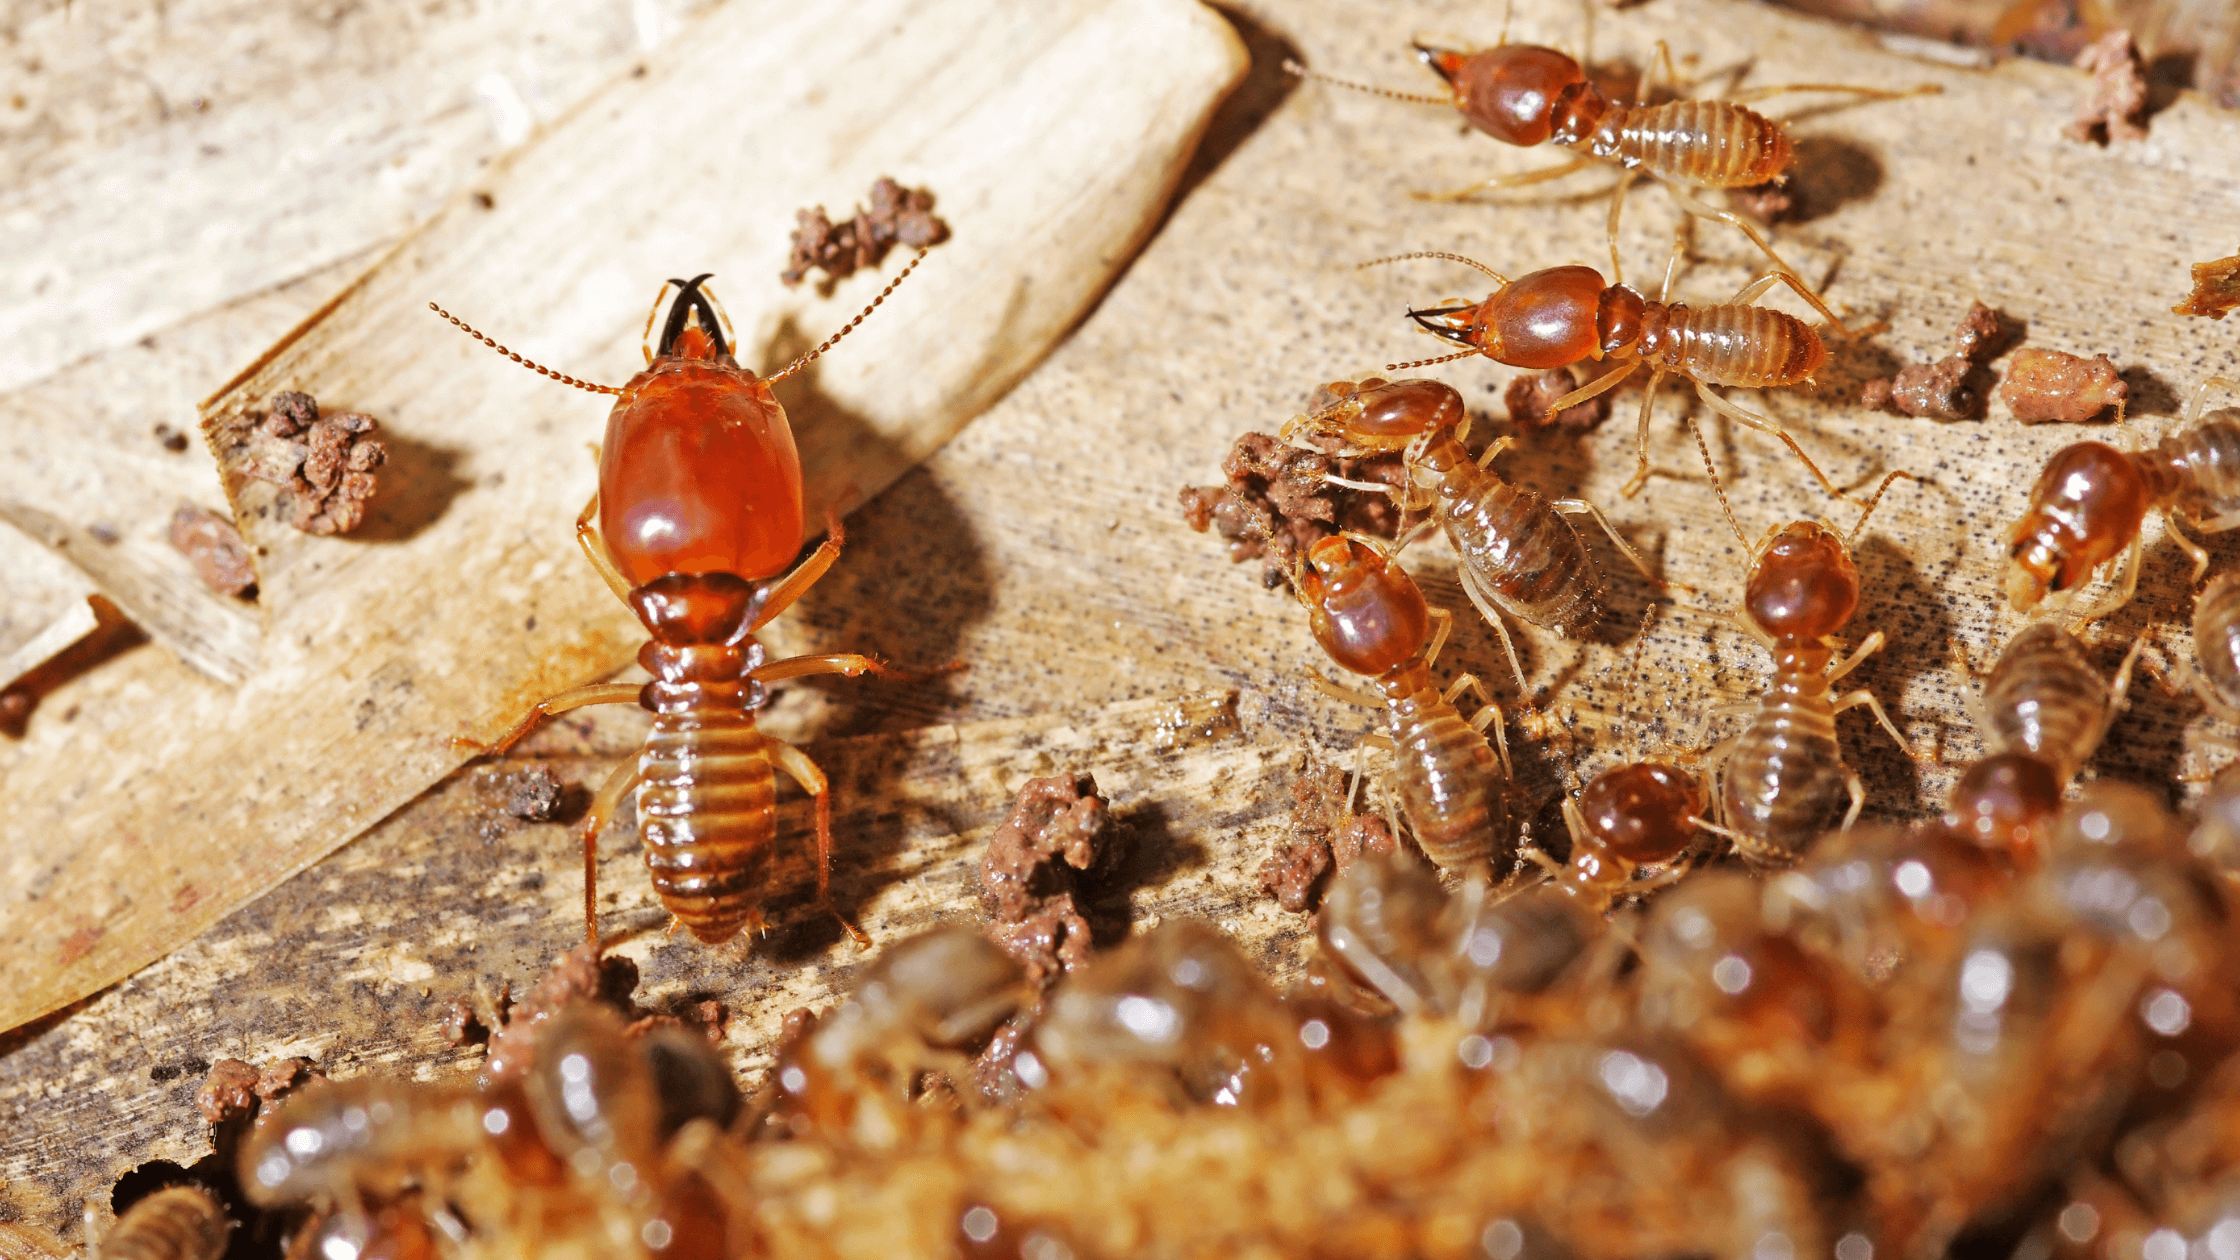 Termite Infestation, common signs of a termite infestation